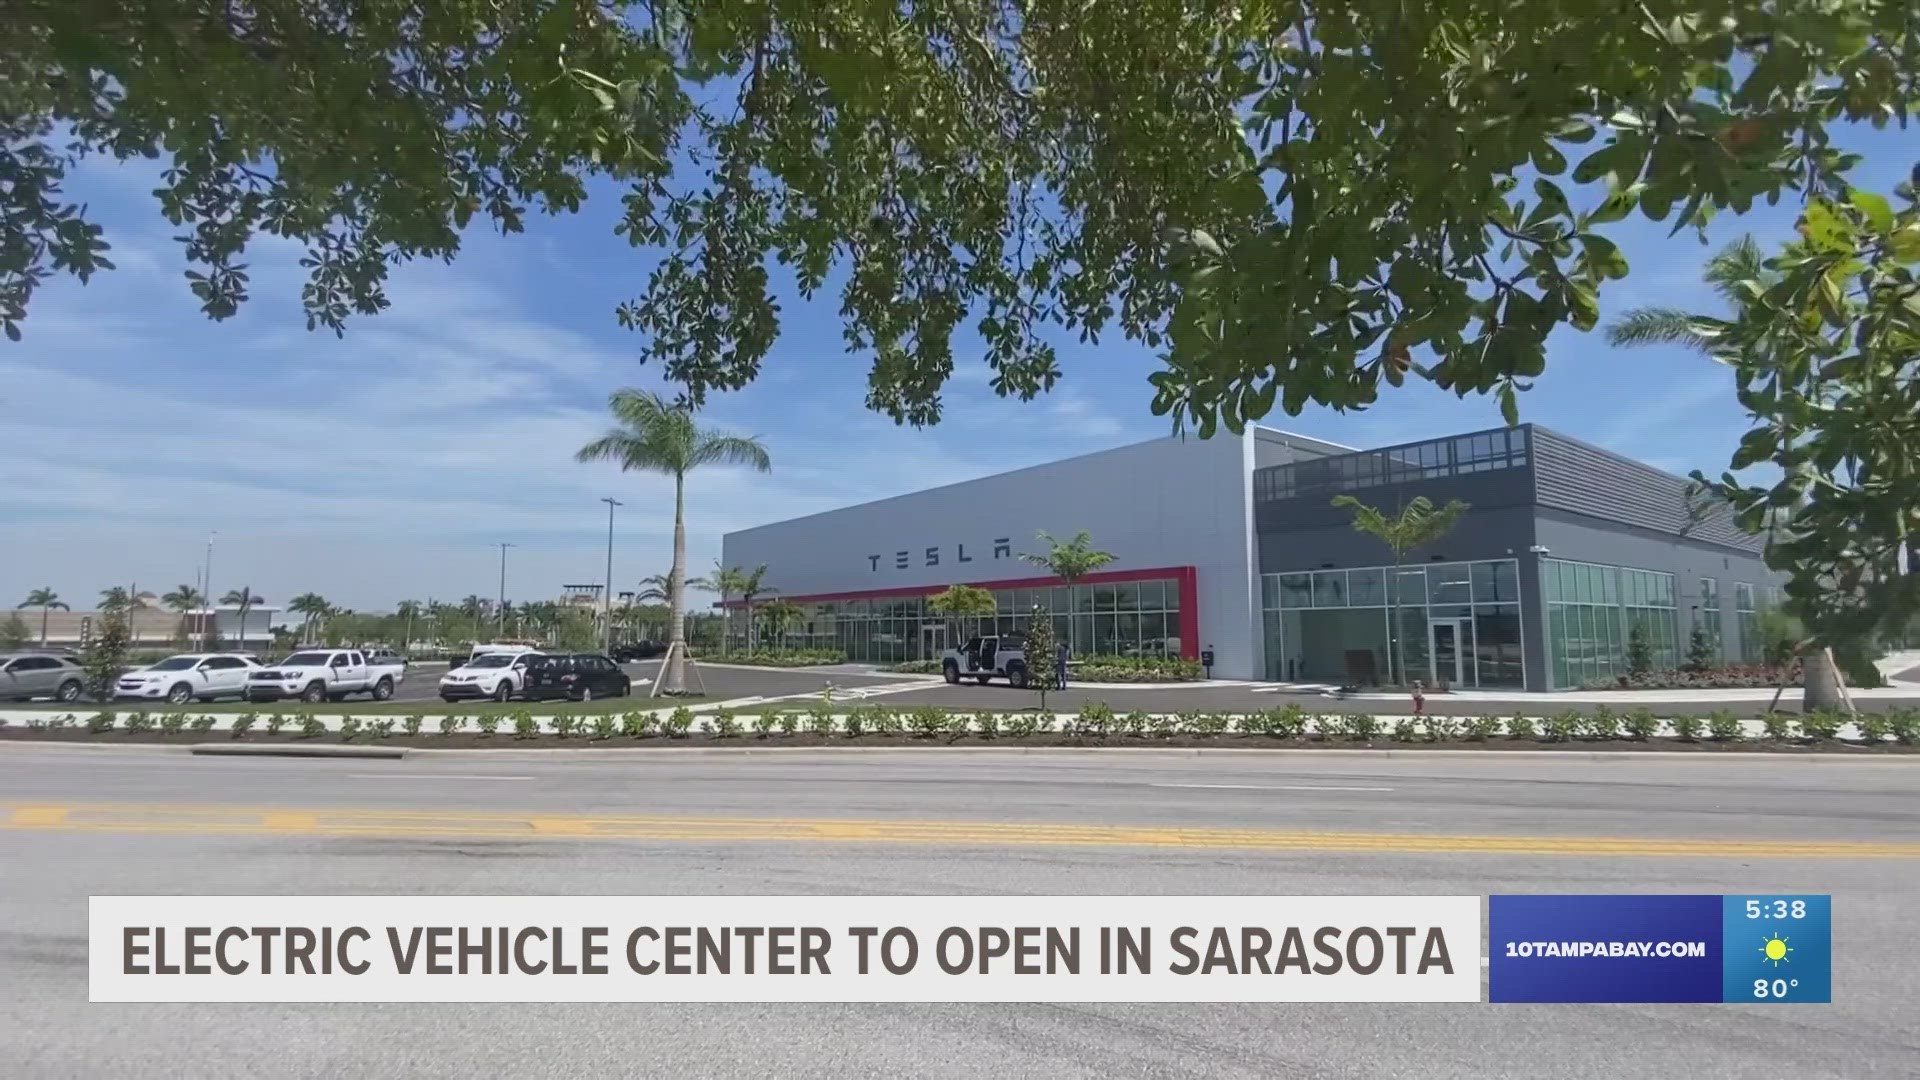 A new 55,000-square-foot Tesla showroom and service center is set to open at the end of April at University Town Center in Sarasota.